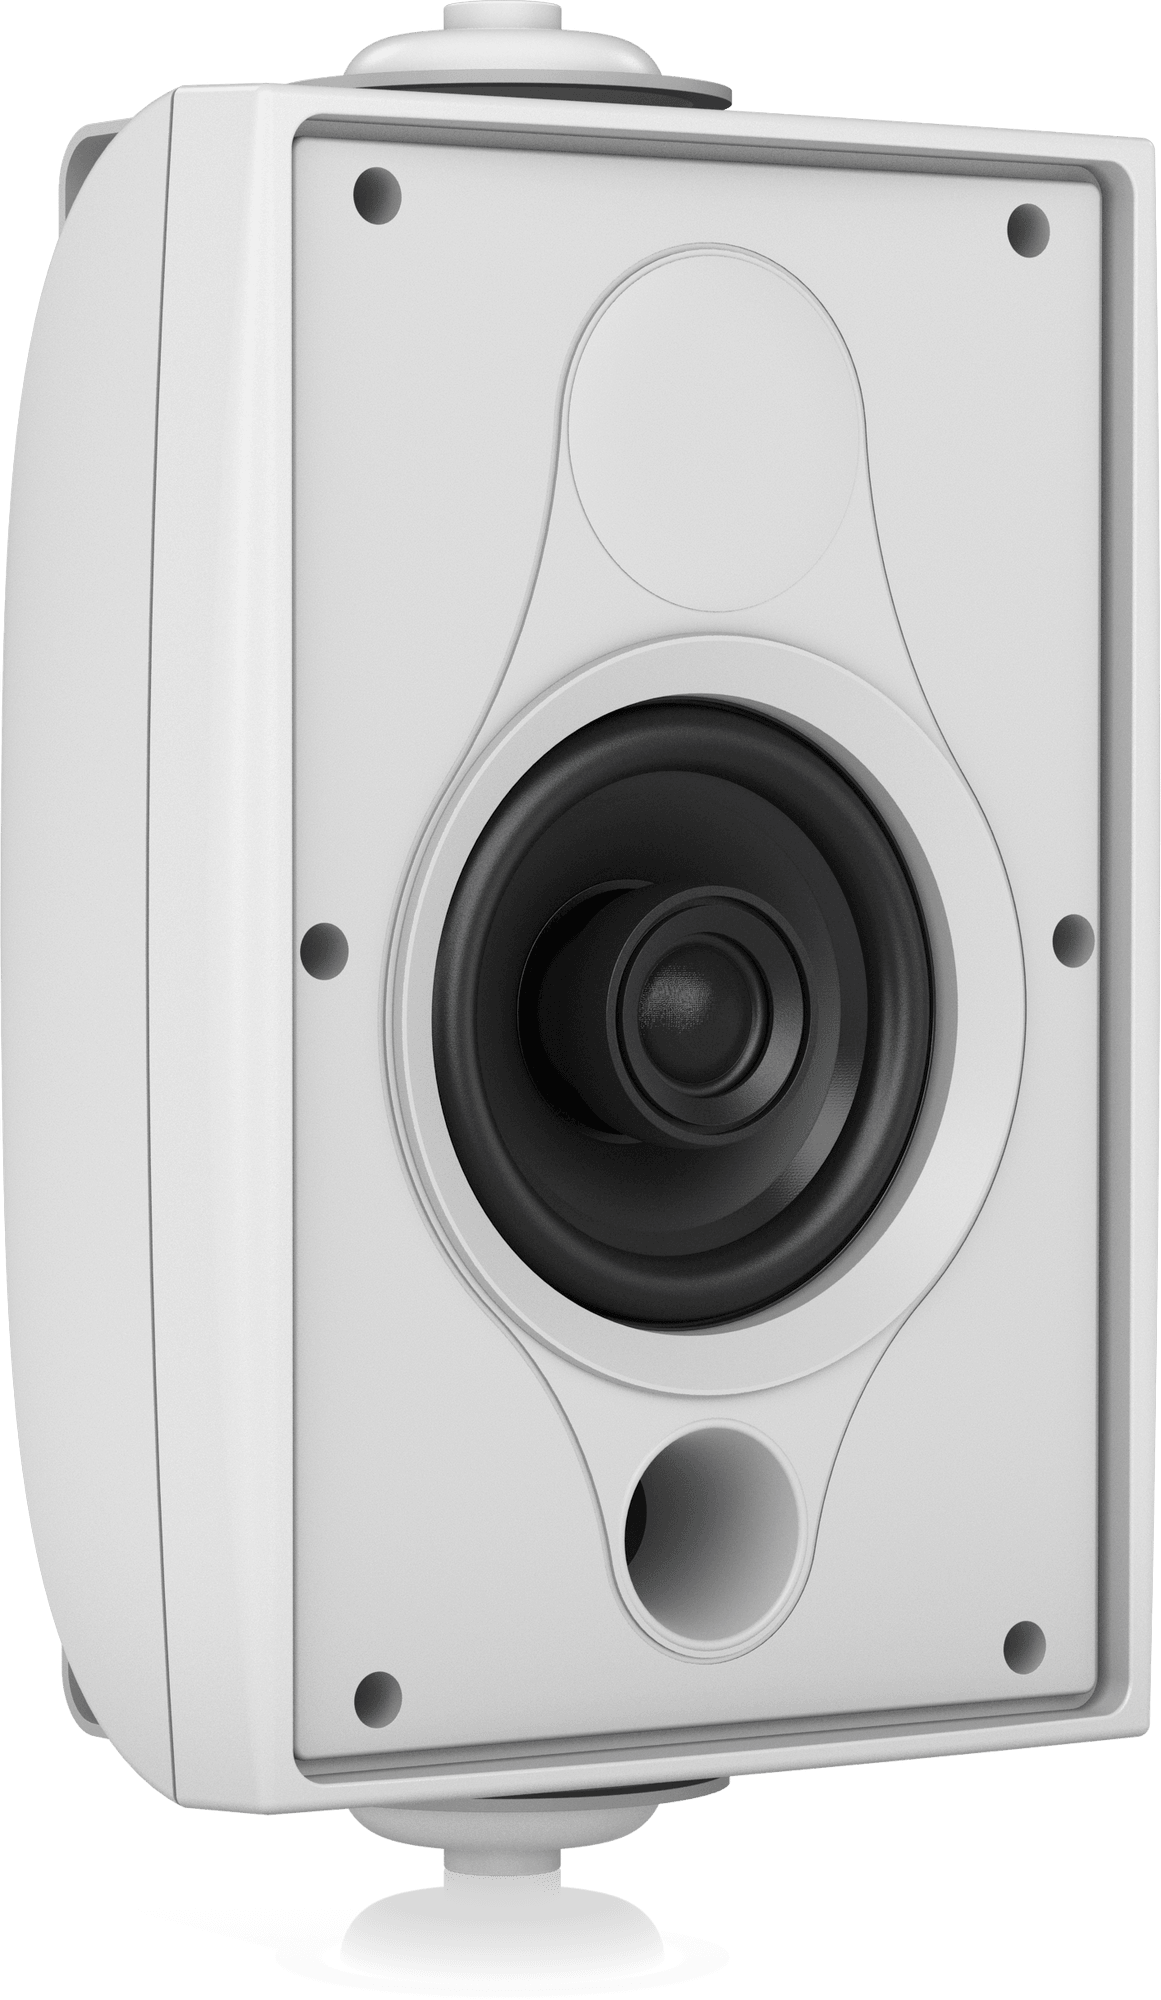 Tannoy DVS 4T (EN 54)-WH- 4" Coaxial Surface-Mount Loudspeaker with Transformer for Installation Applications (EN 54-24 Certified, White)